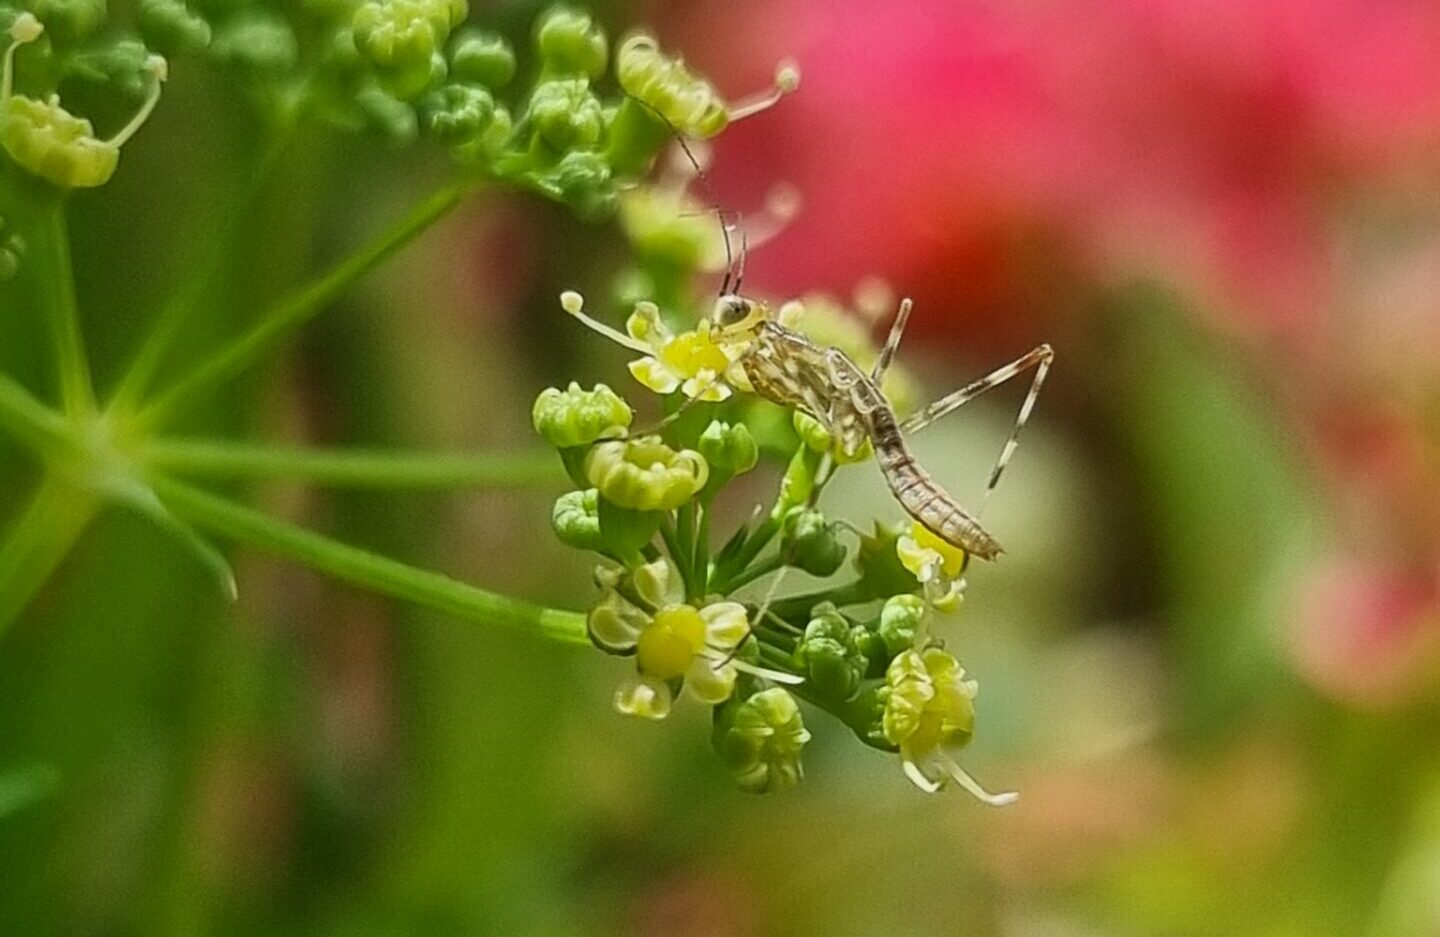 A Praying Mantis crouches on a flower